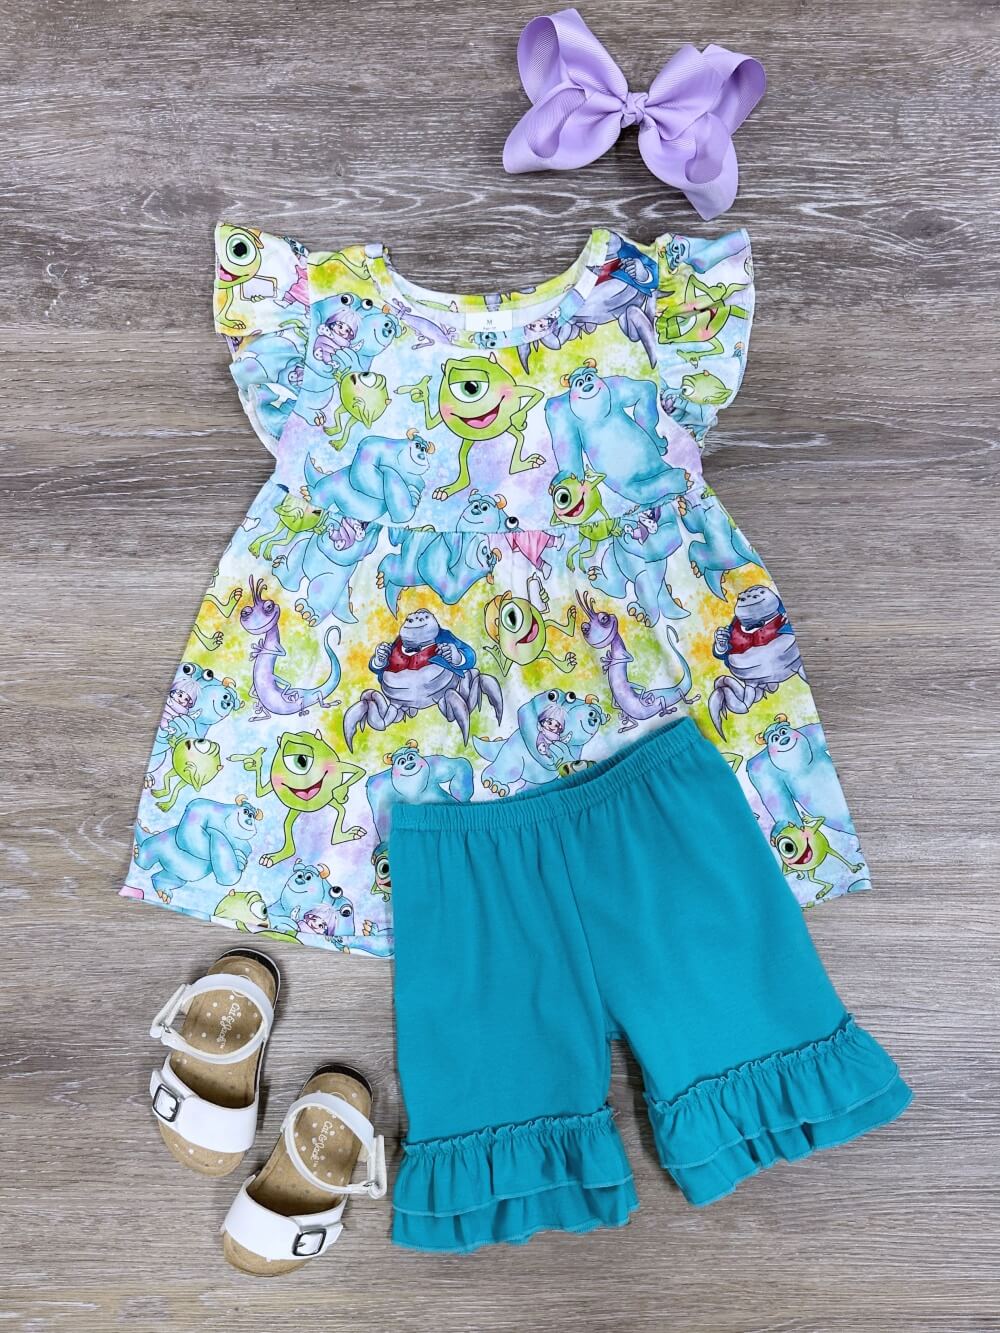 Friendly Monsters Girls Ruffle Trim Shorts Outfit - Sydney So Sweet